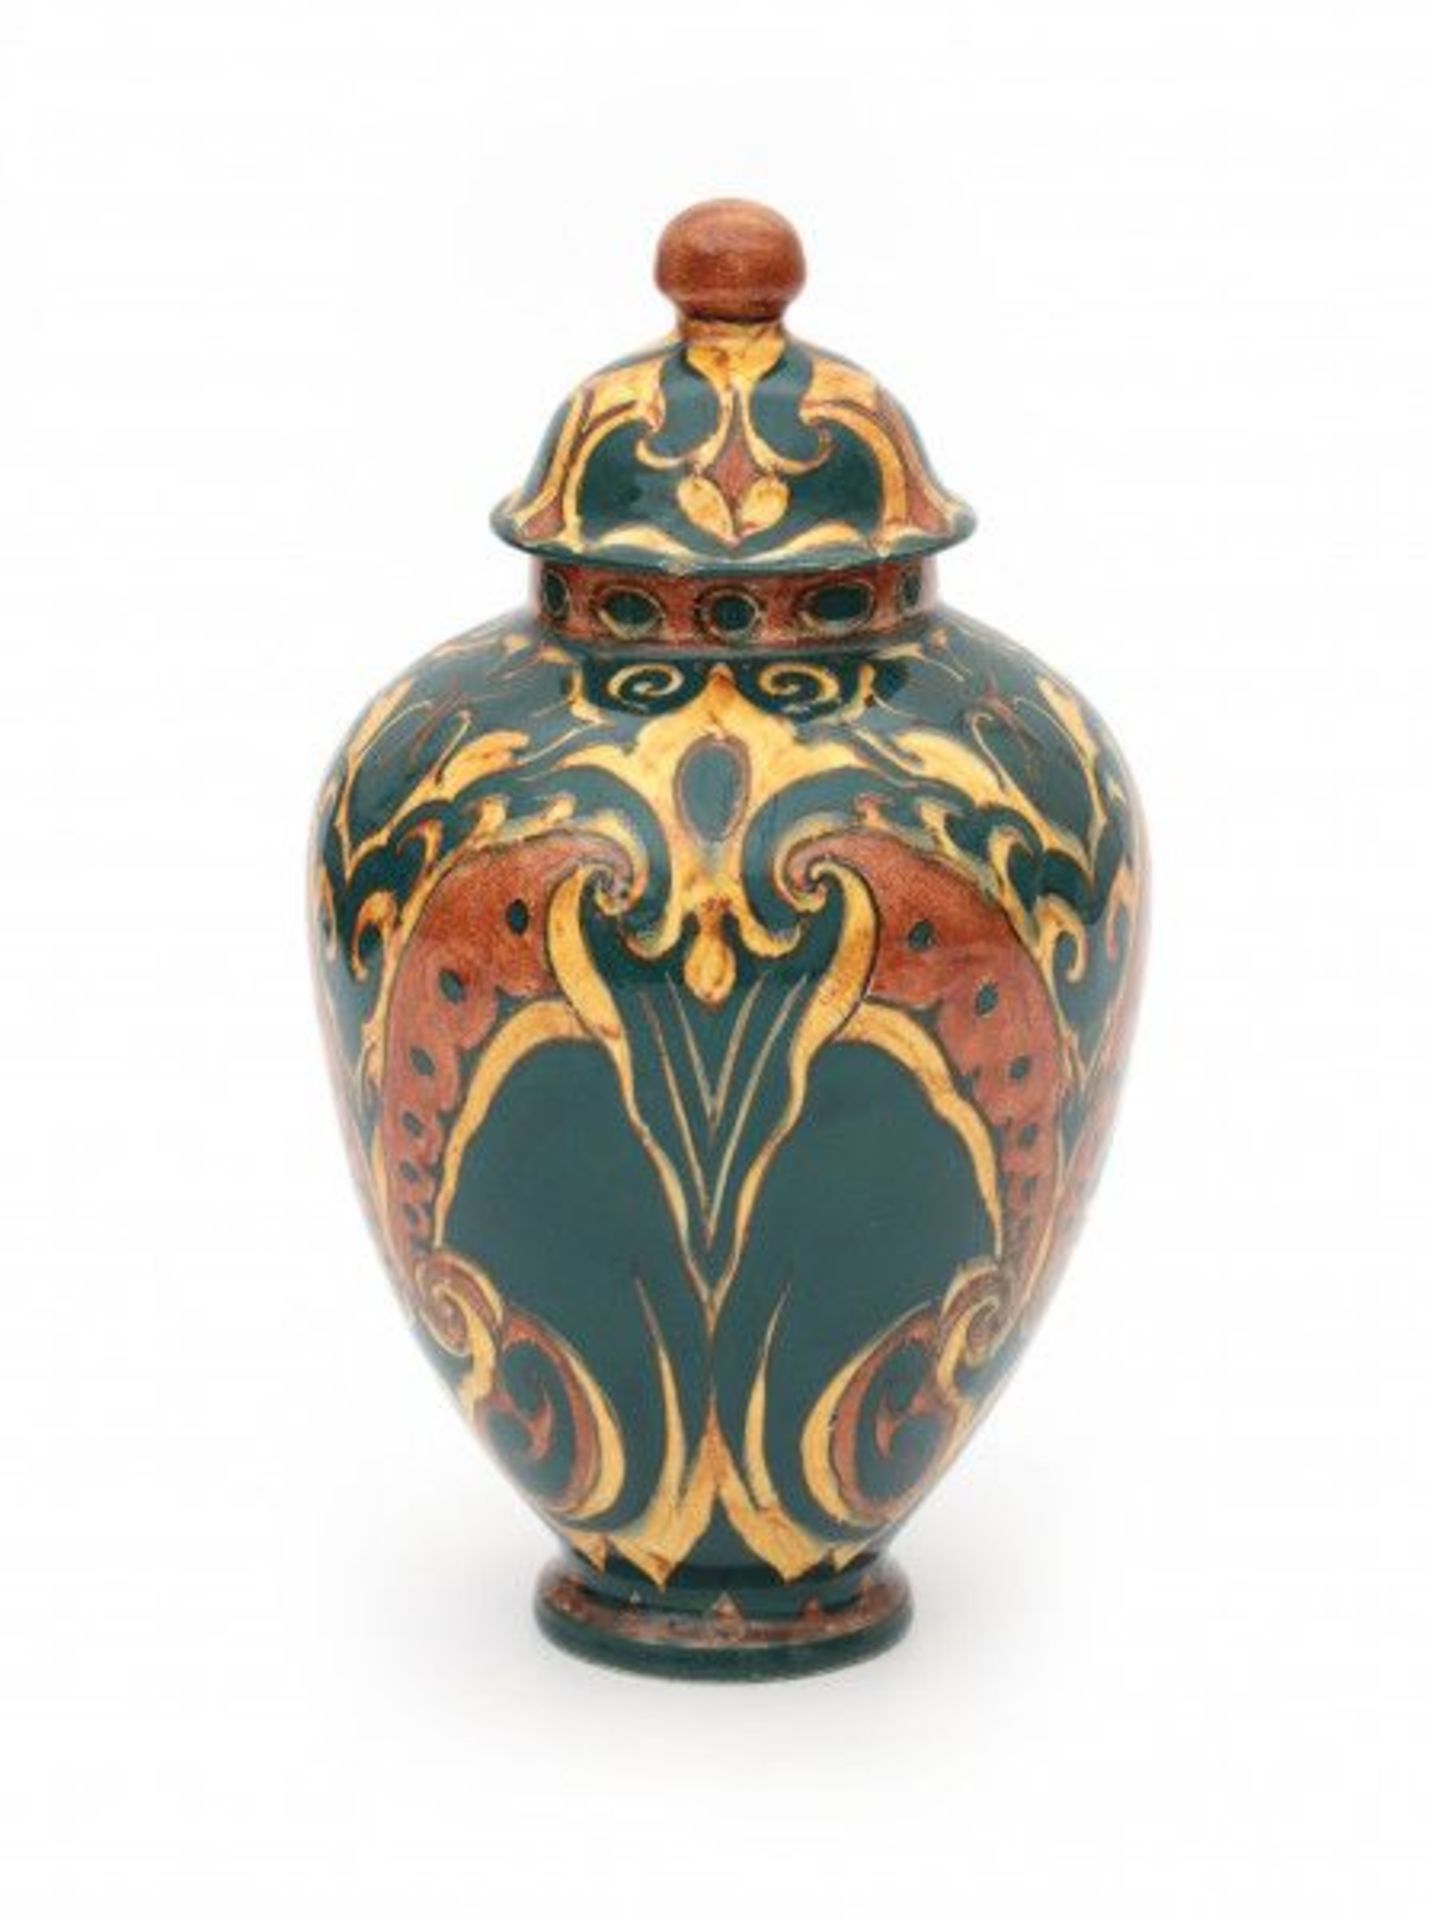 N.V. Haagsche Plateelfabriek Rozenburg, Den Haag (1883-1917)A ceramic vase and cover decorated with